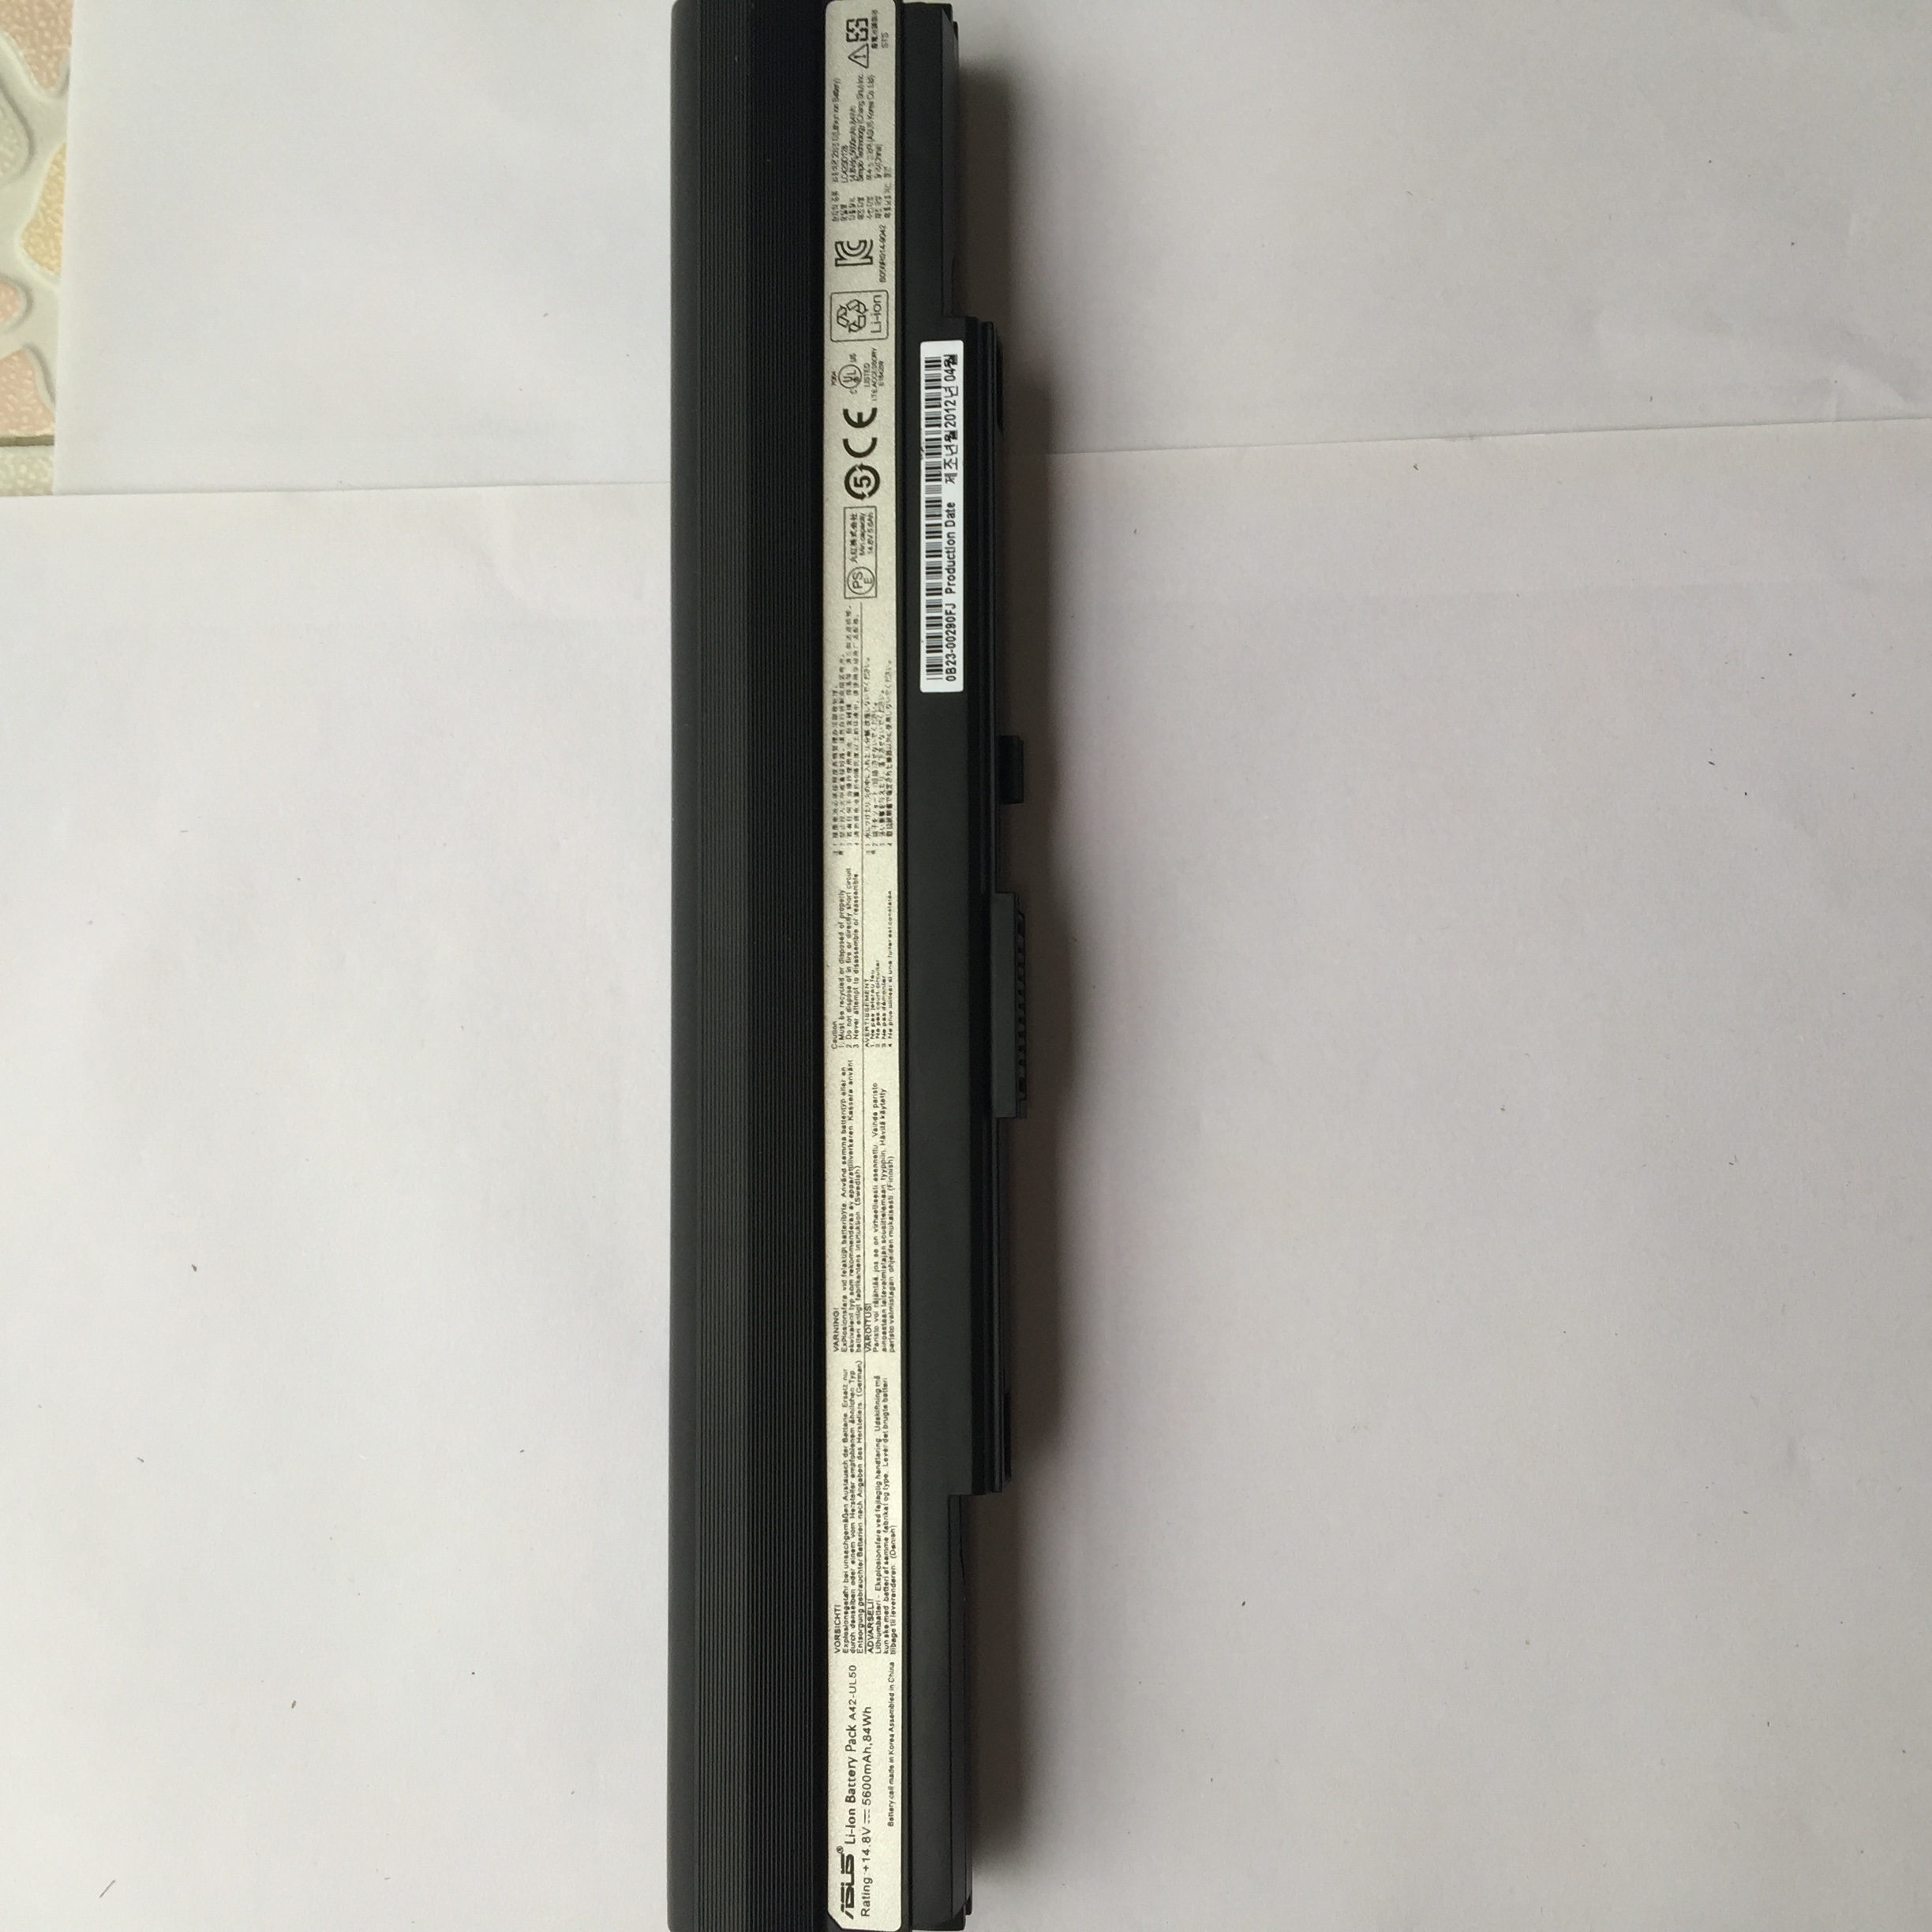 A42-UL50 laptop battery lithium ion batteries 14.8V 5600mAh for ASUS U30 Series U30JC U35 Series U35JC U45 Series U45JC UL30 Series